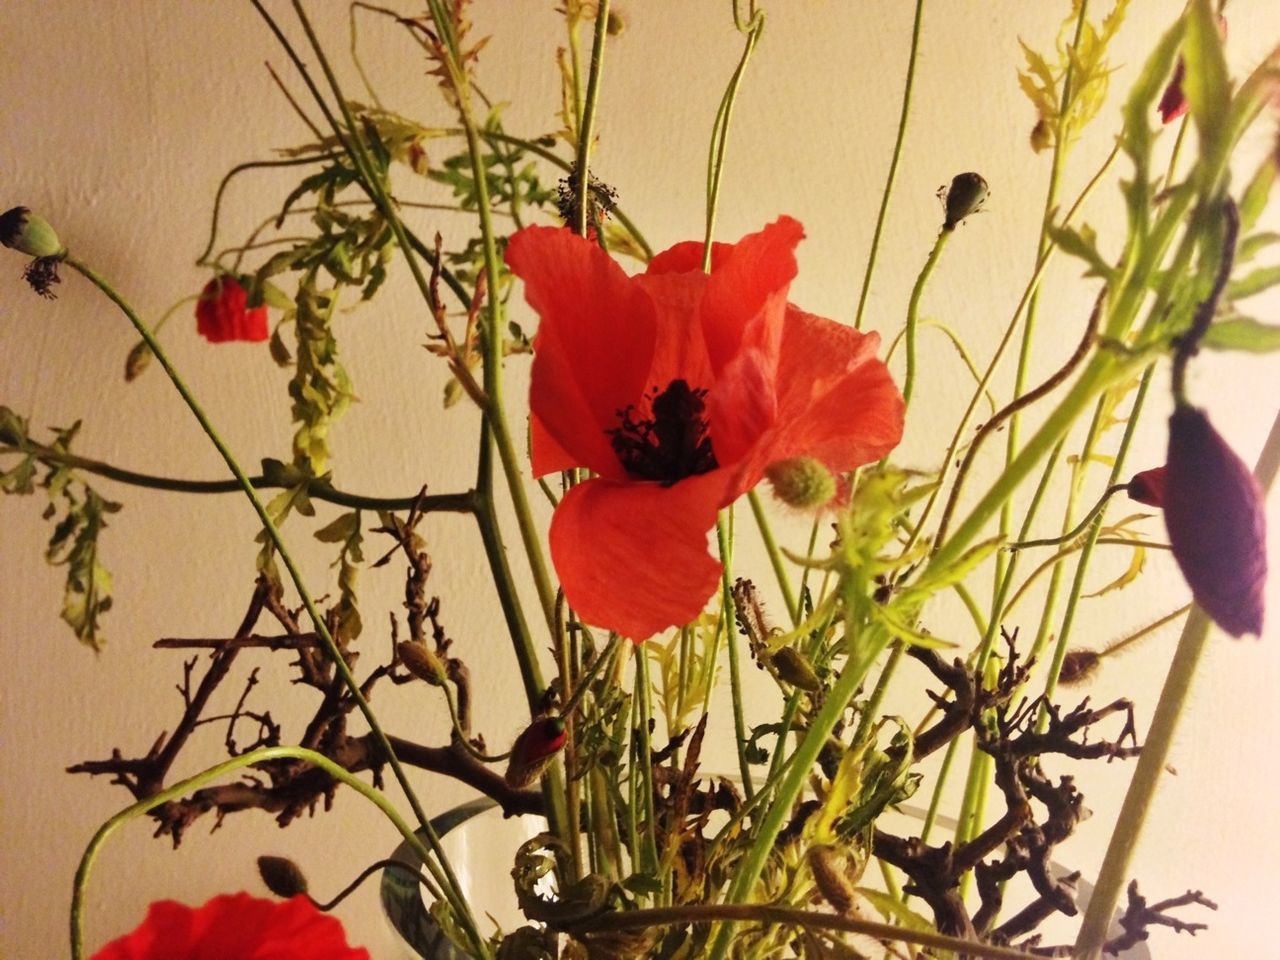 CLOSE-UP OF RED POPPIES IN VASE